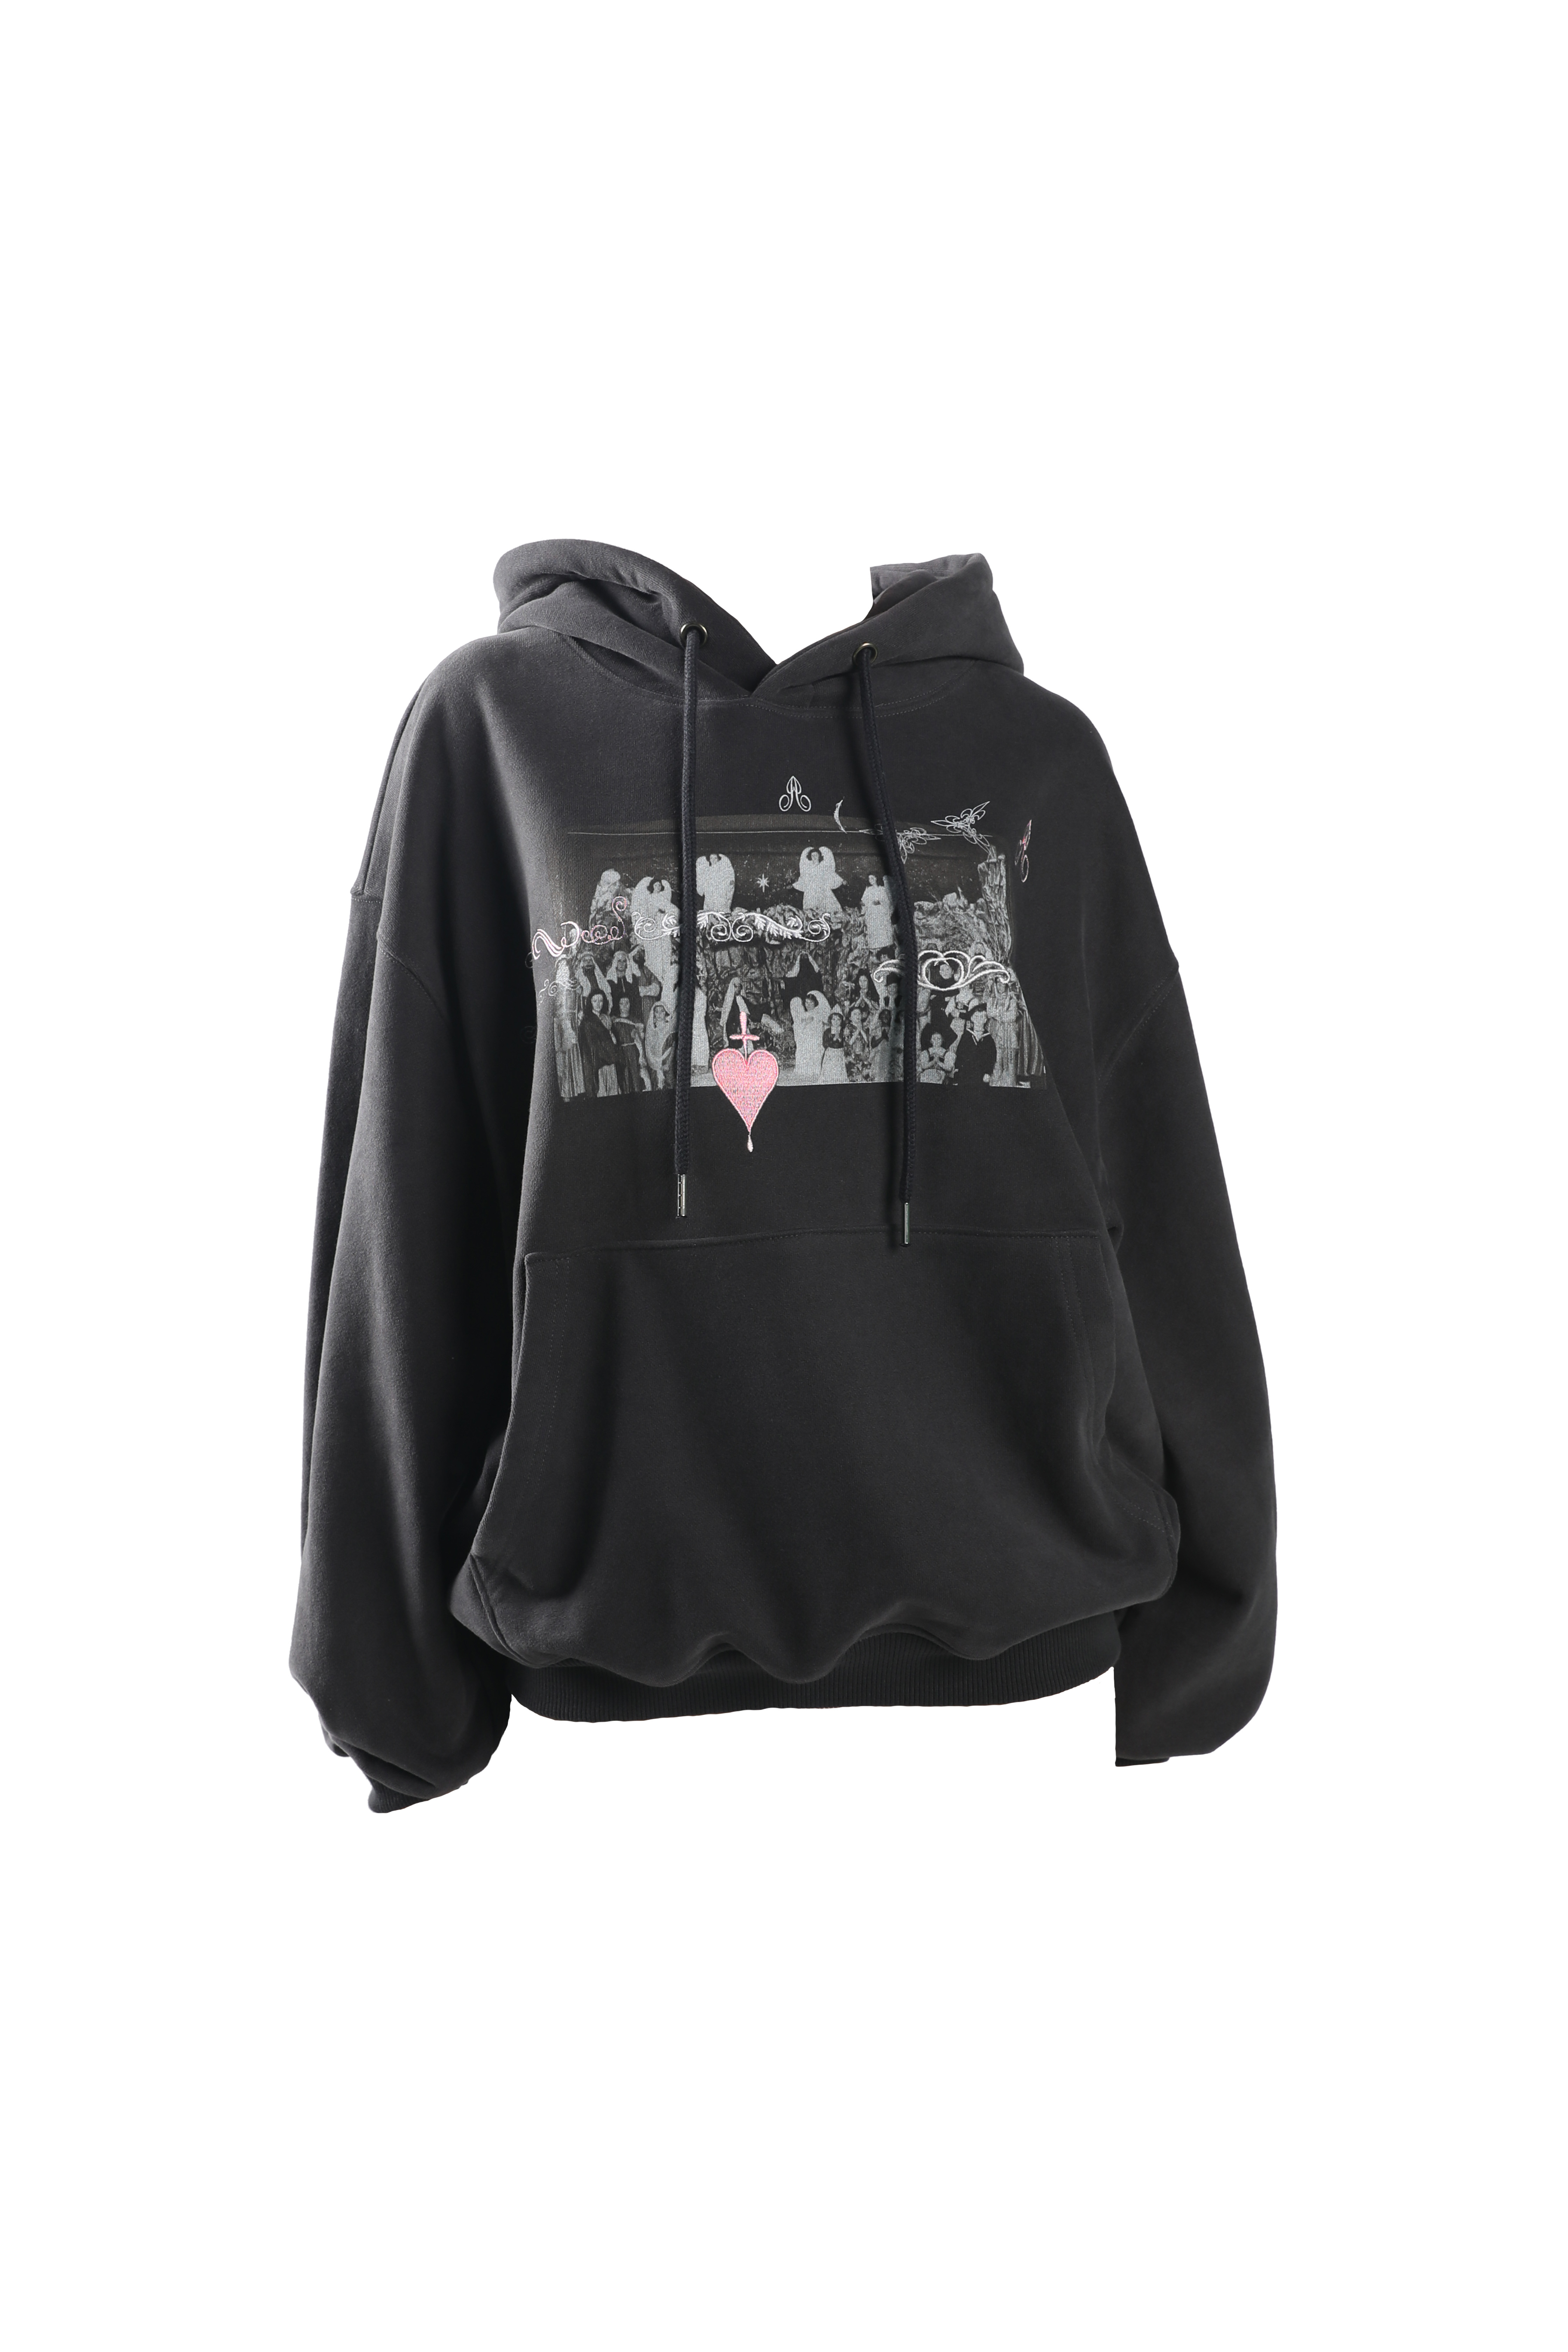 [2nd restock 10월20일 예약발송] Theater club hoodie ver.2 (charcoal)